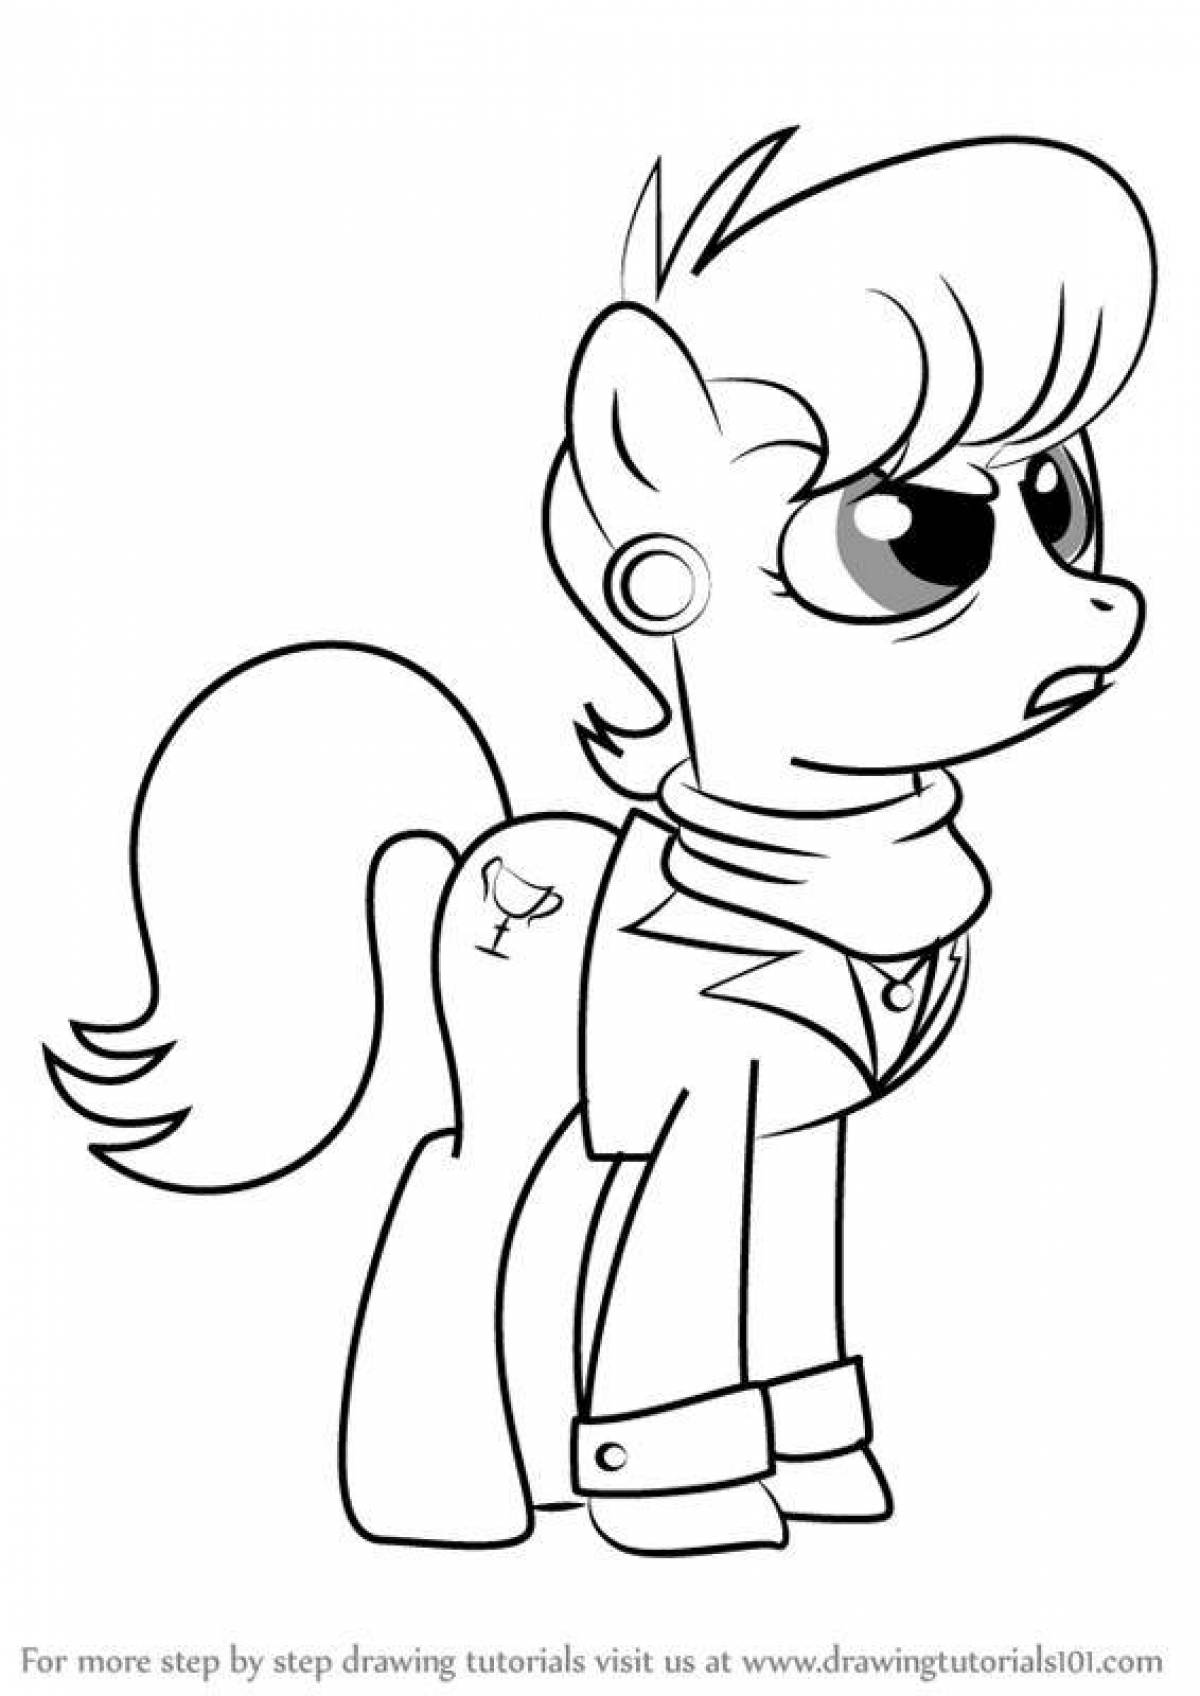 Great pony playtime coloring page